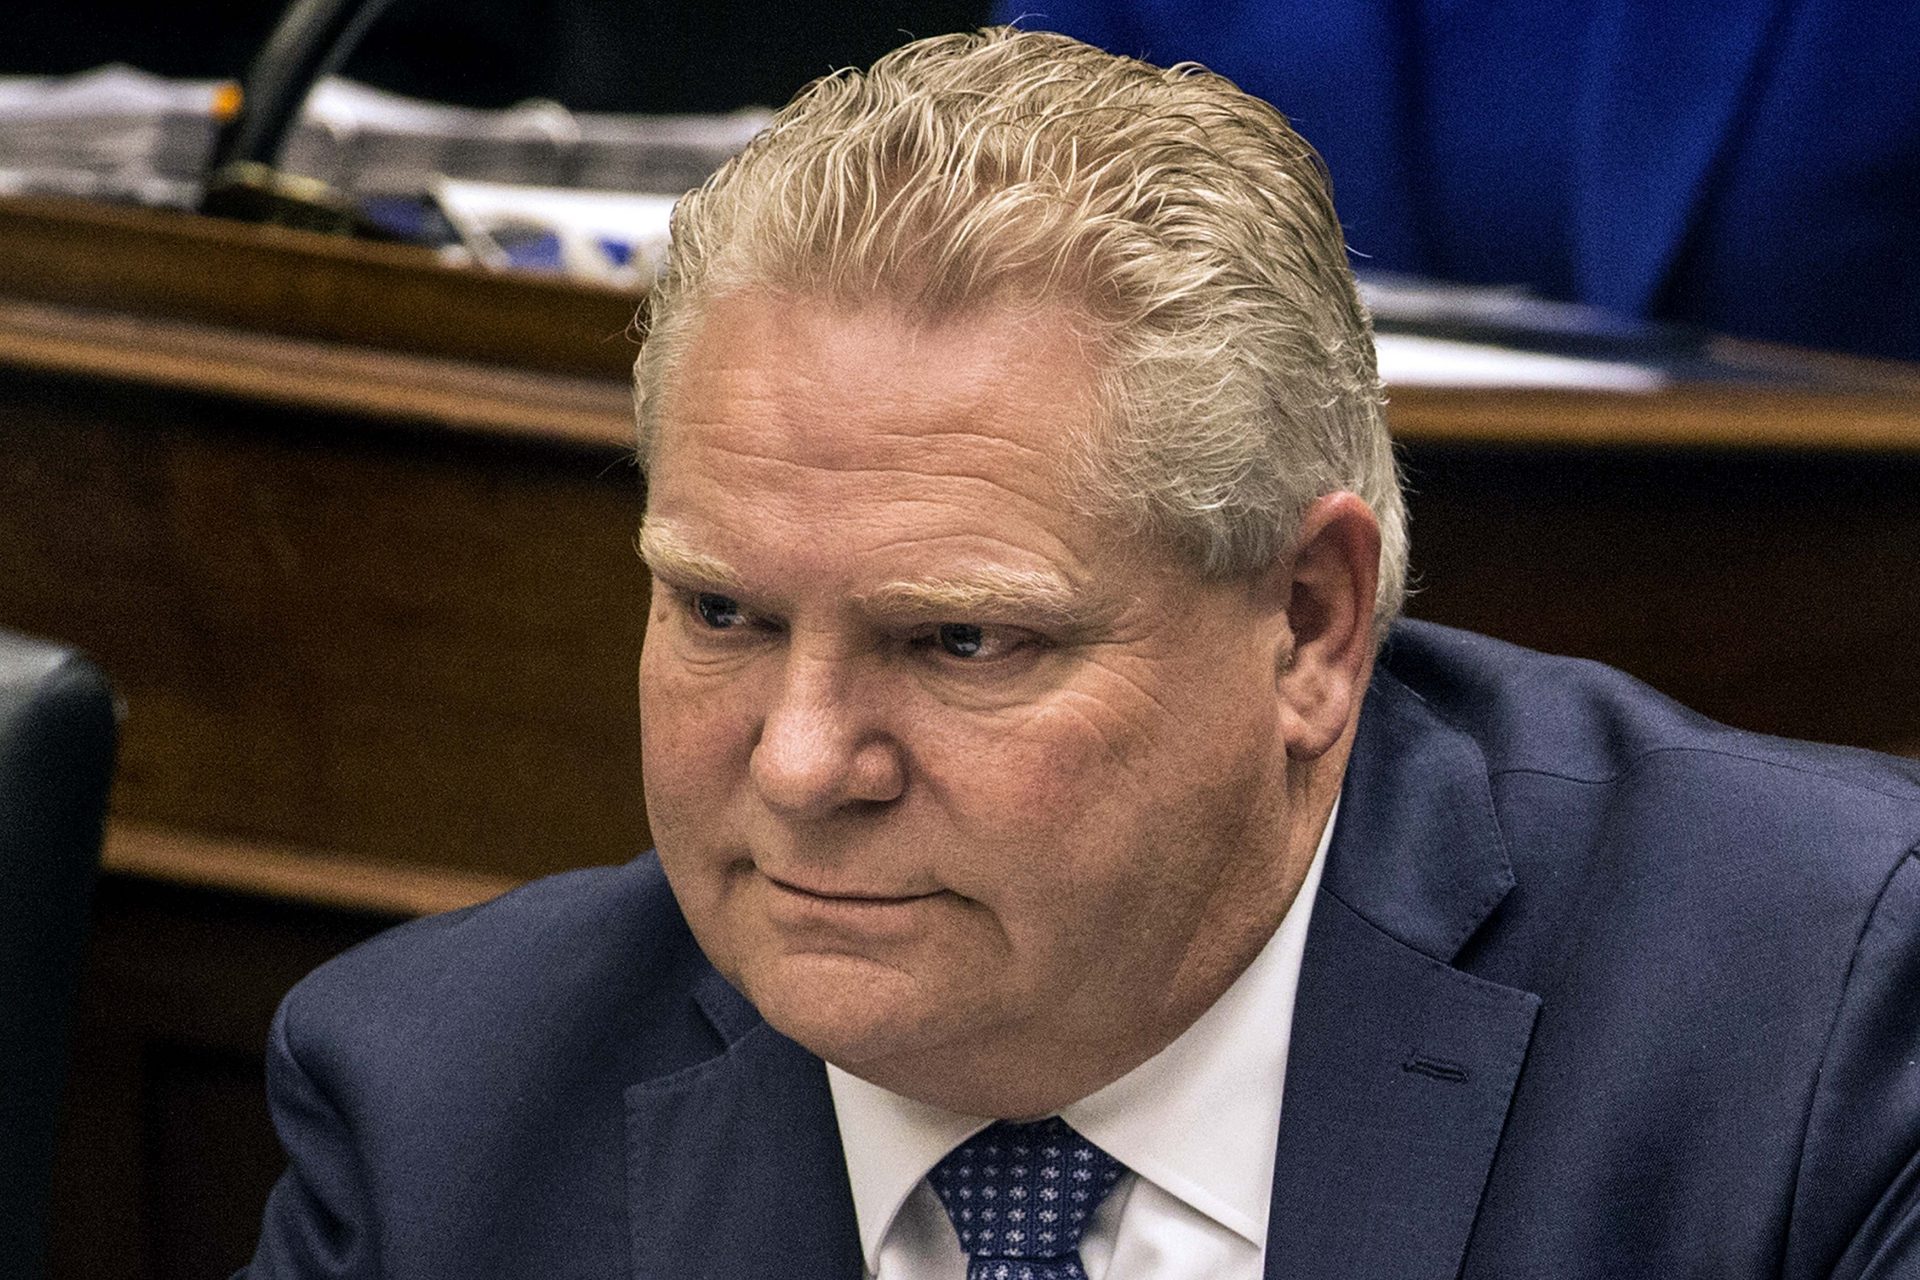 6 in 10 Ontarians feel the government is on the wrong track, says poll